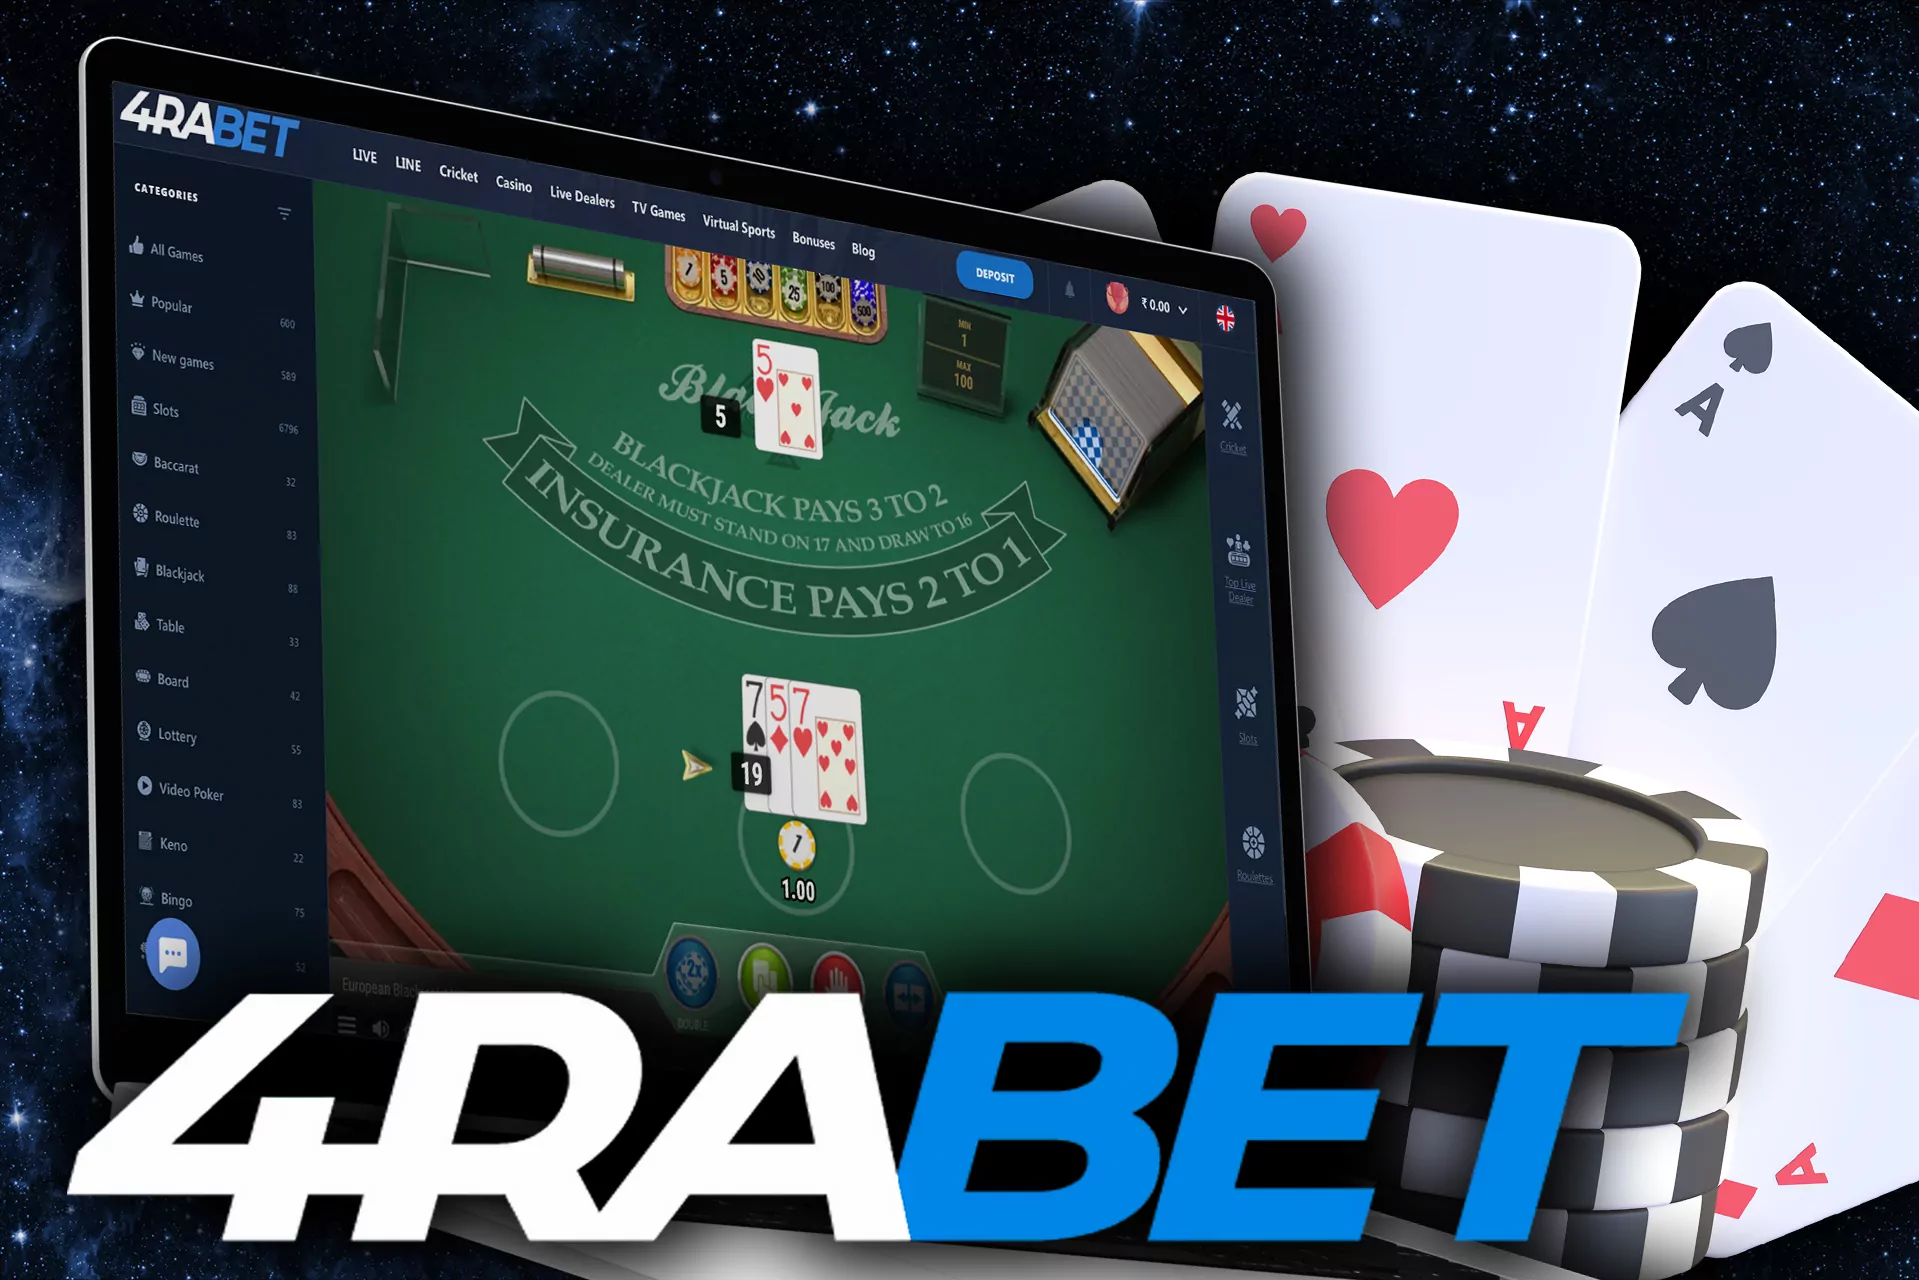 Gather 21 points and win big money in blackjack.